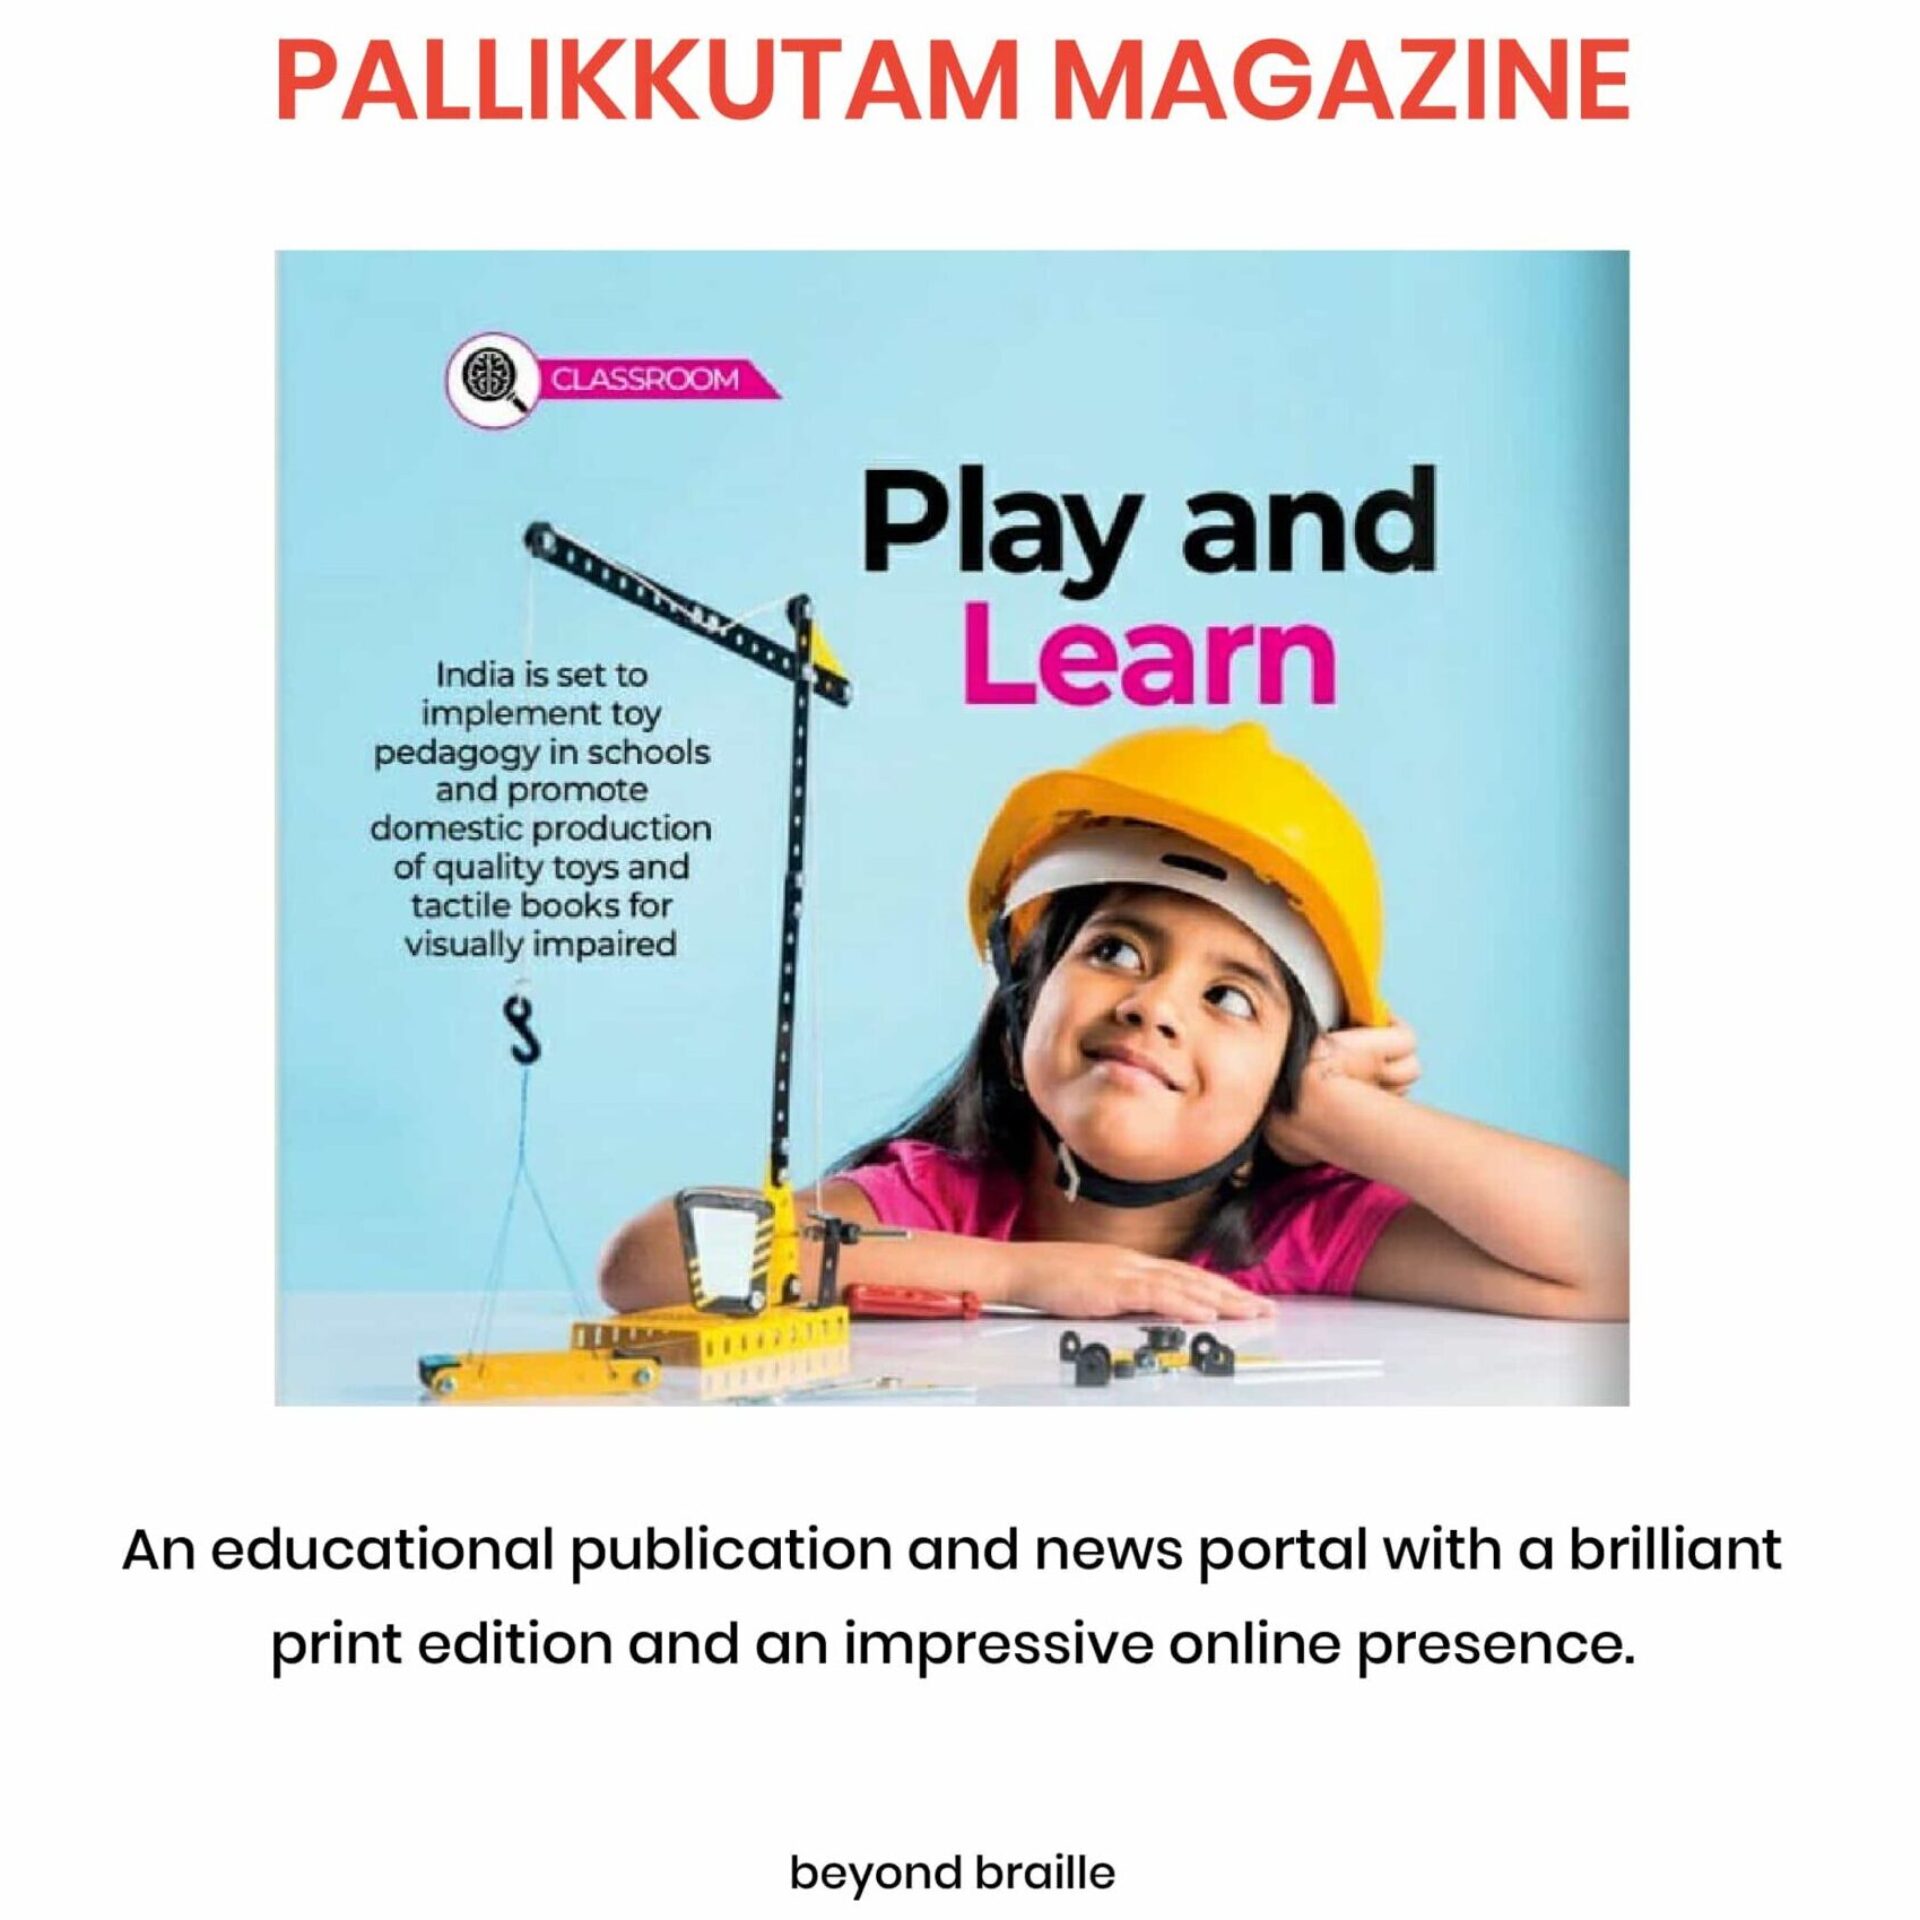 Front page of Pallikkutam Magazine showing a small girl wearing a yellow Hat and looking at a toy